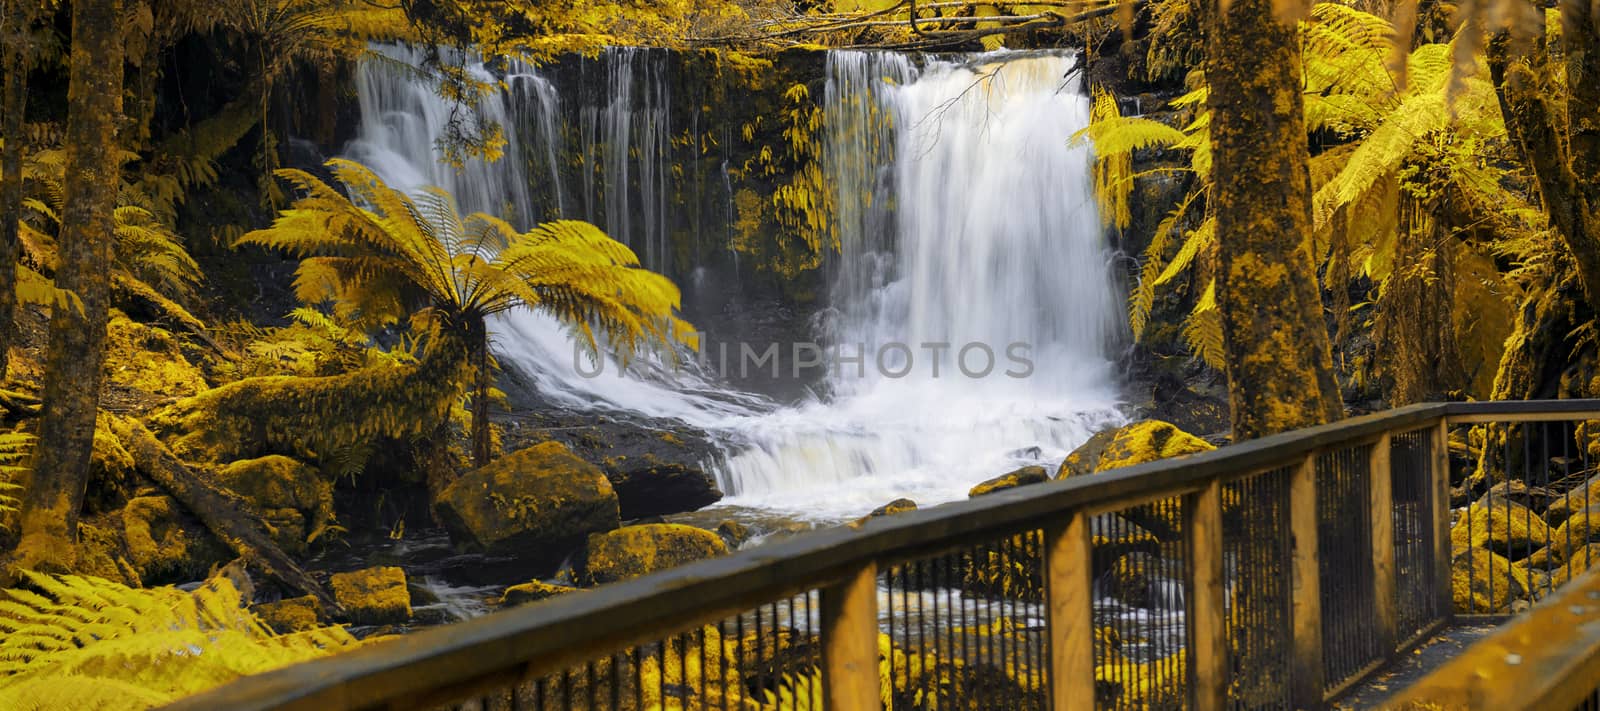 The beautiful Horseshoe Falls after heavy rain fall in Mount Field National Park, Tasmania, Australia. Abstract yellow and gold hues added.